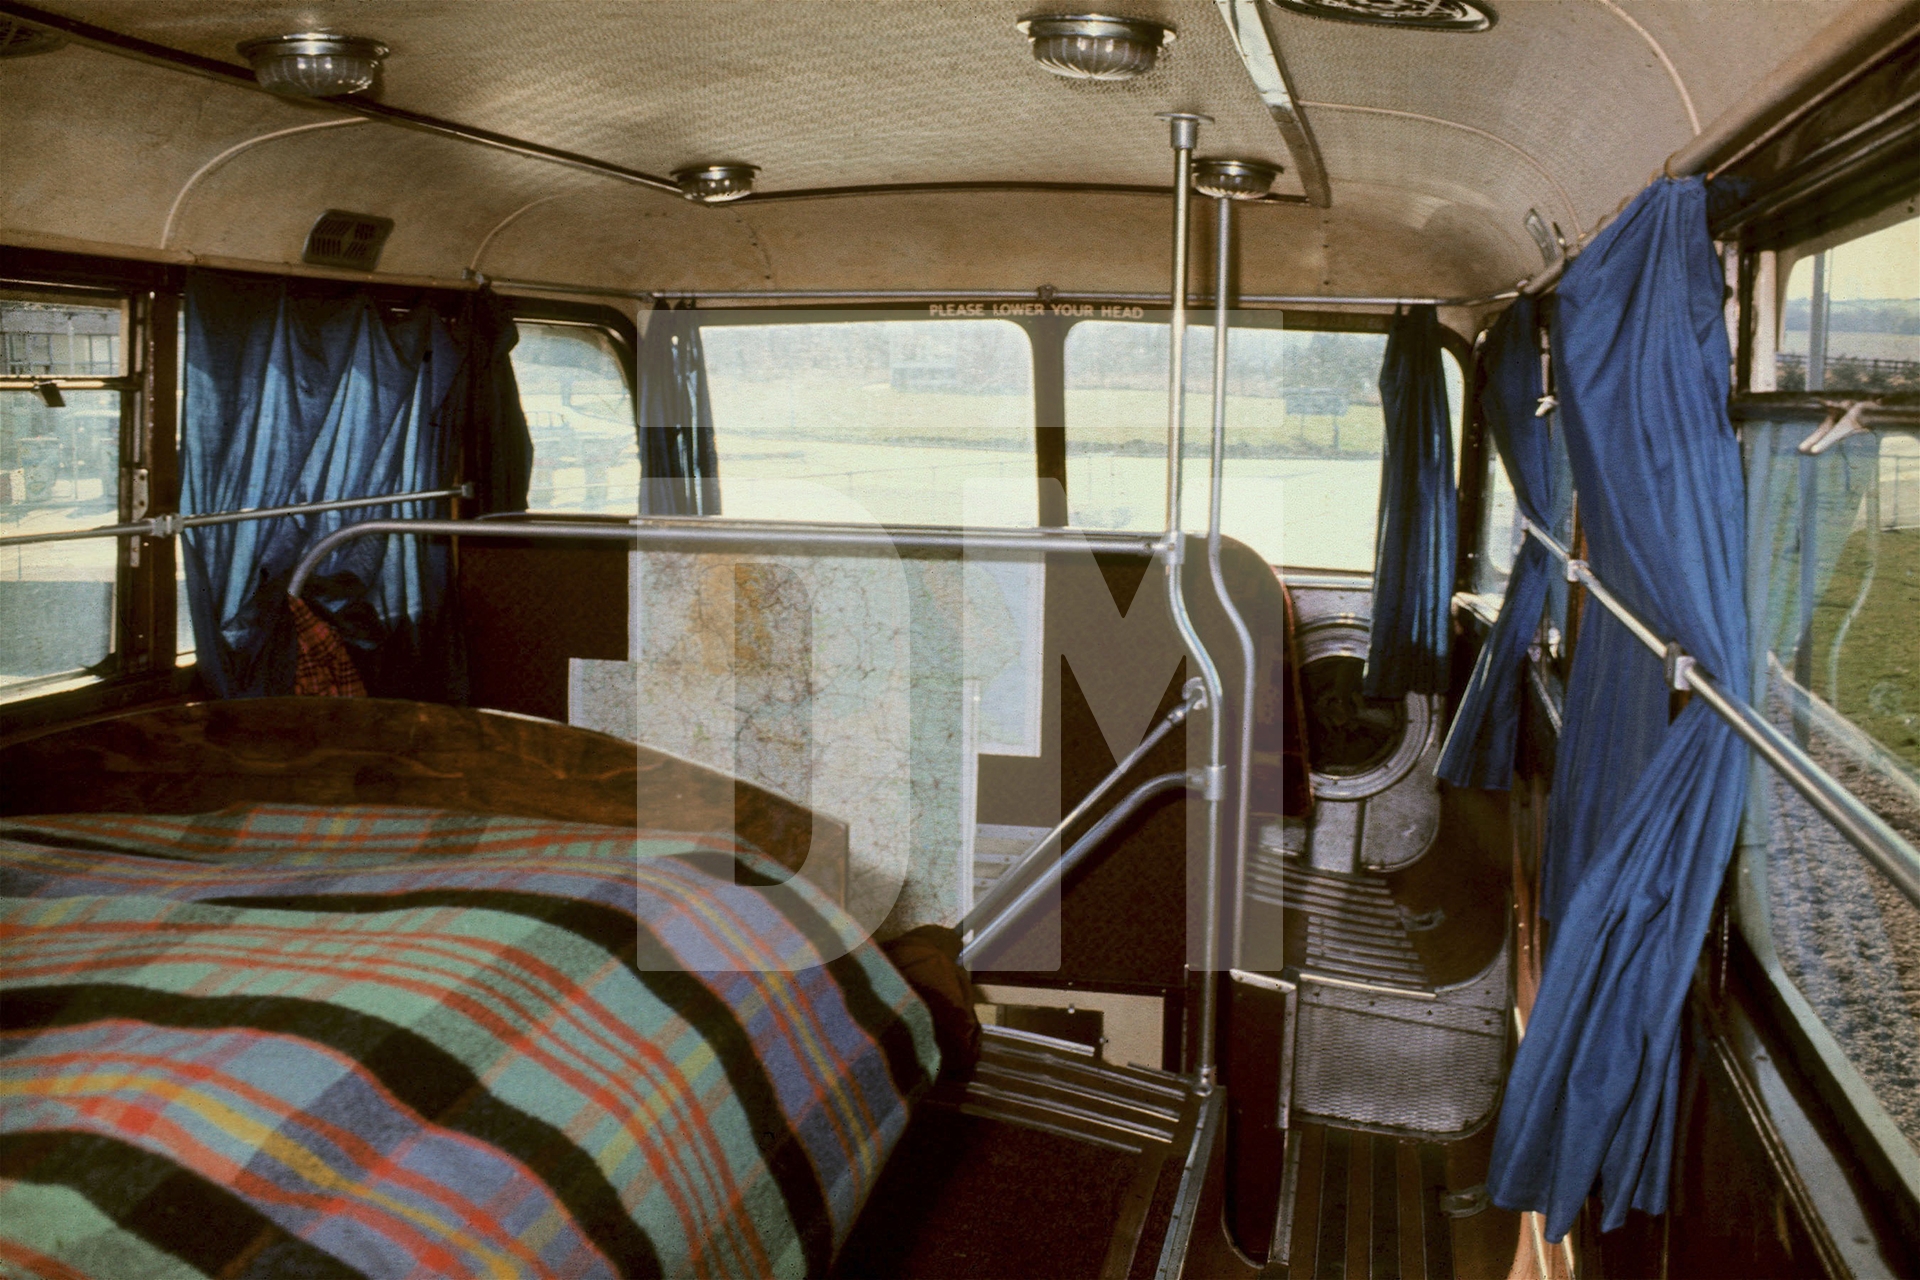 Free Photographic Omnibus, interior upstairs looking towards the front. Birmingham, March 1974 by Daniel Meadows